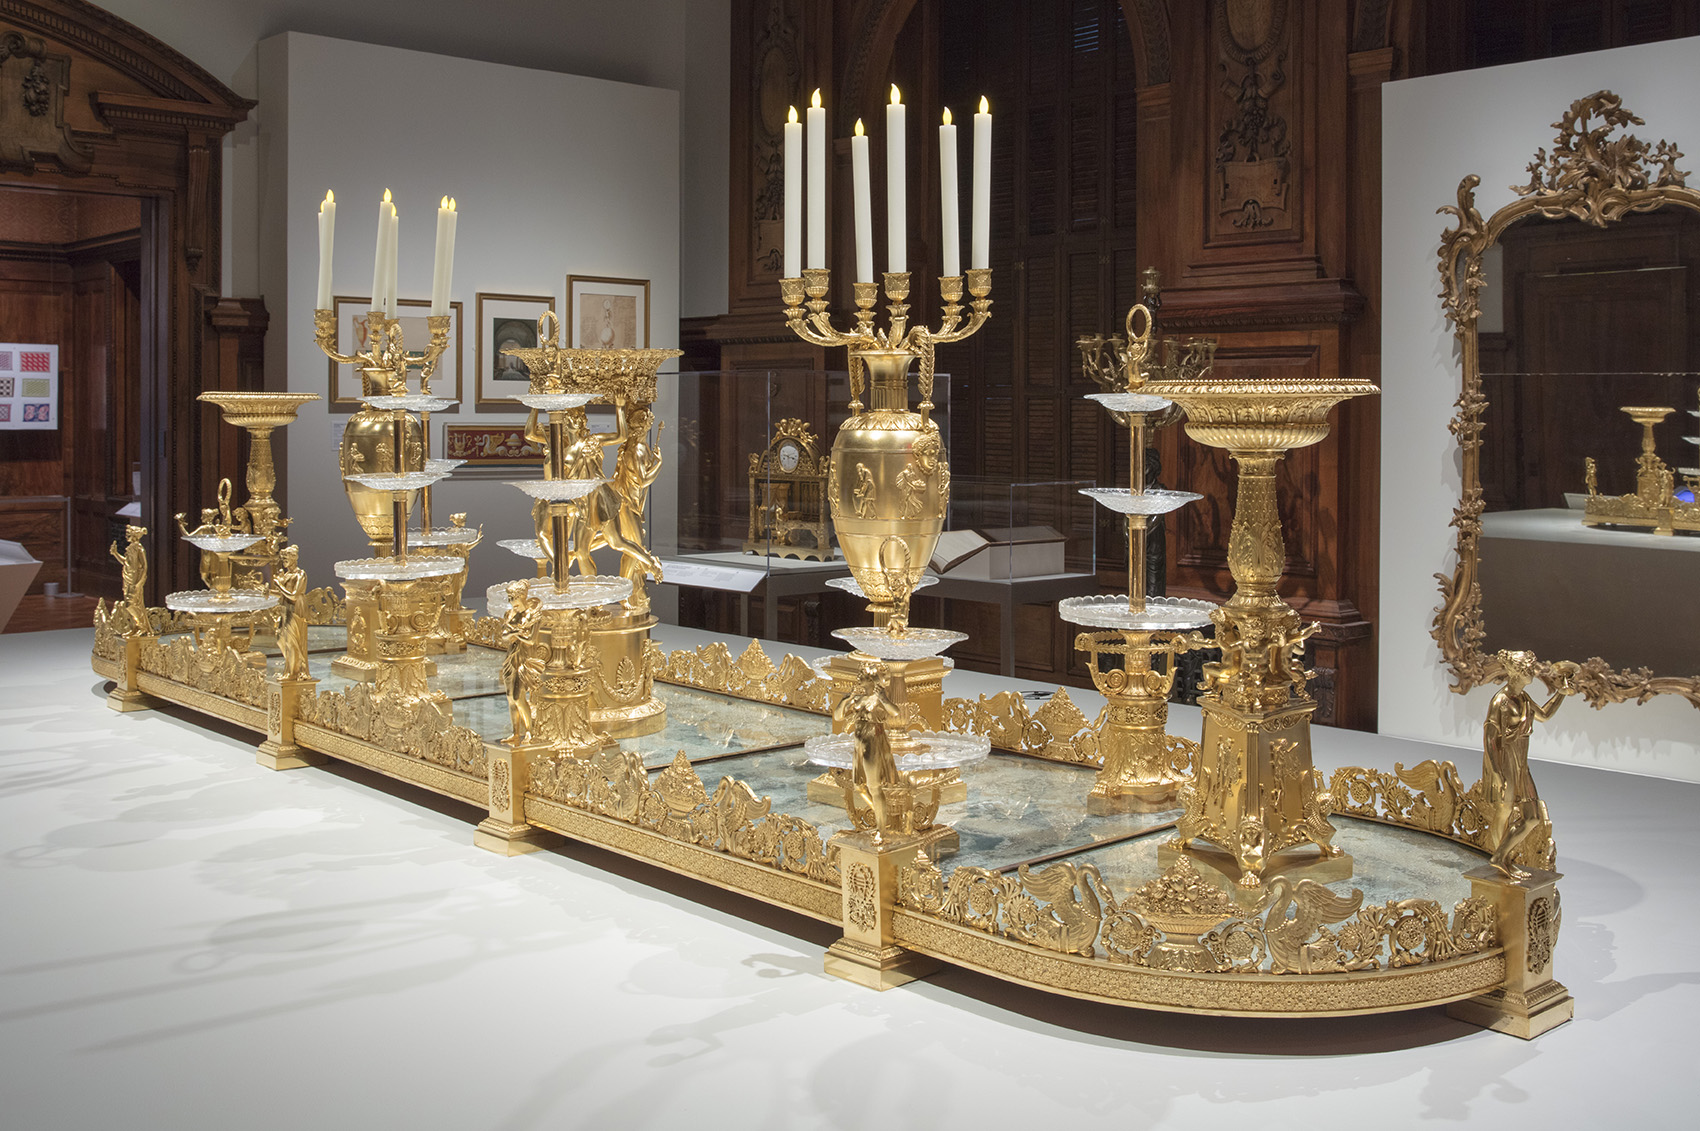 In the center of a gallery, a bronze centerpiece made of 49 individual elements sits upon a platform. The base of the centerpiece is a mirrored plateau made of five sections. On the plateau an array of tiered food display stands fill the space with glass dishes of varied heights. Two candelabra are the tallest elements, lit dimly with a flickering light.